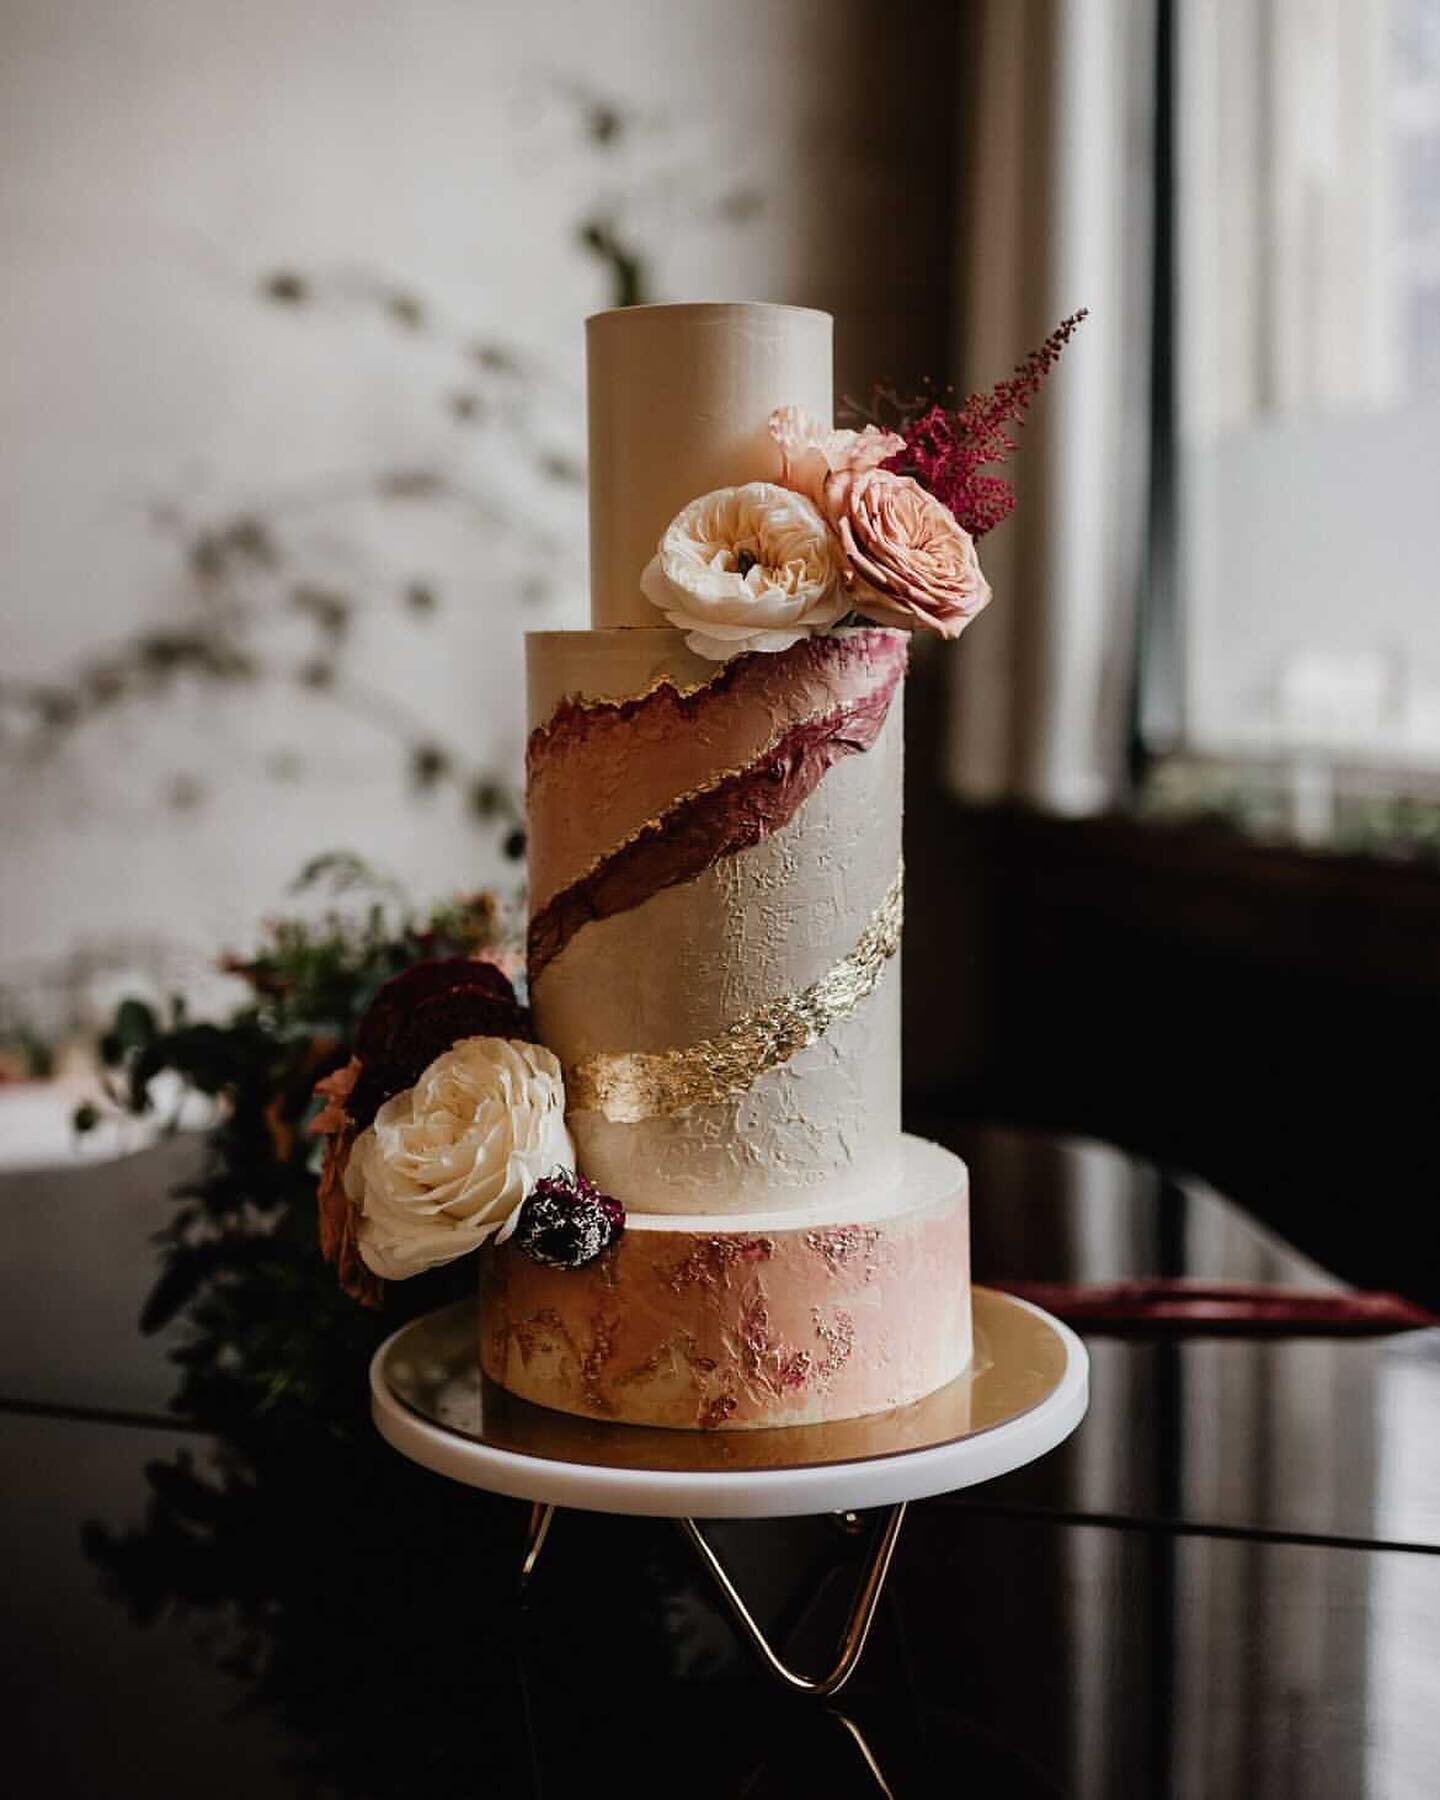 This weeks spotlight is on the incredibly talented Jo from @misshavishamscakes in South Wales, UK - everytime one of Jo&rsquo;s magical creations show in my feed I know they&rsquo;re hers before I see her name! Her floral placement, colour palettes, 